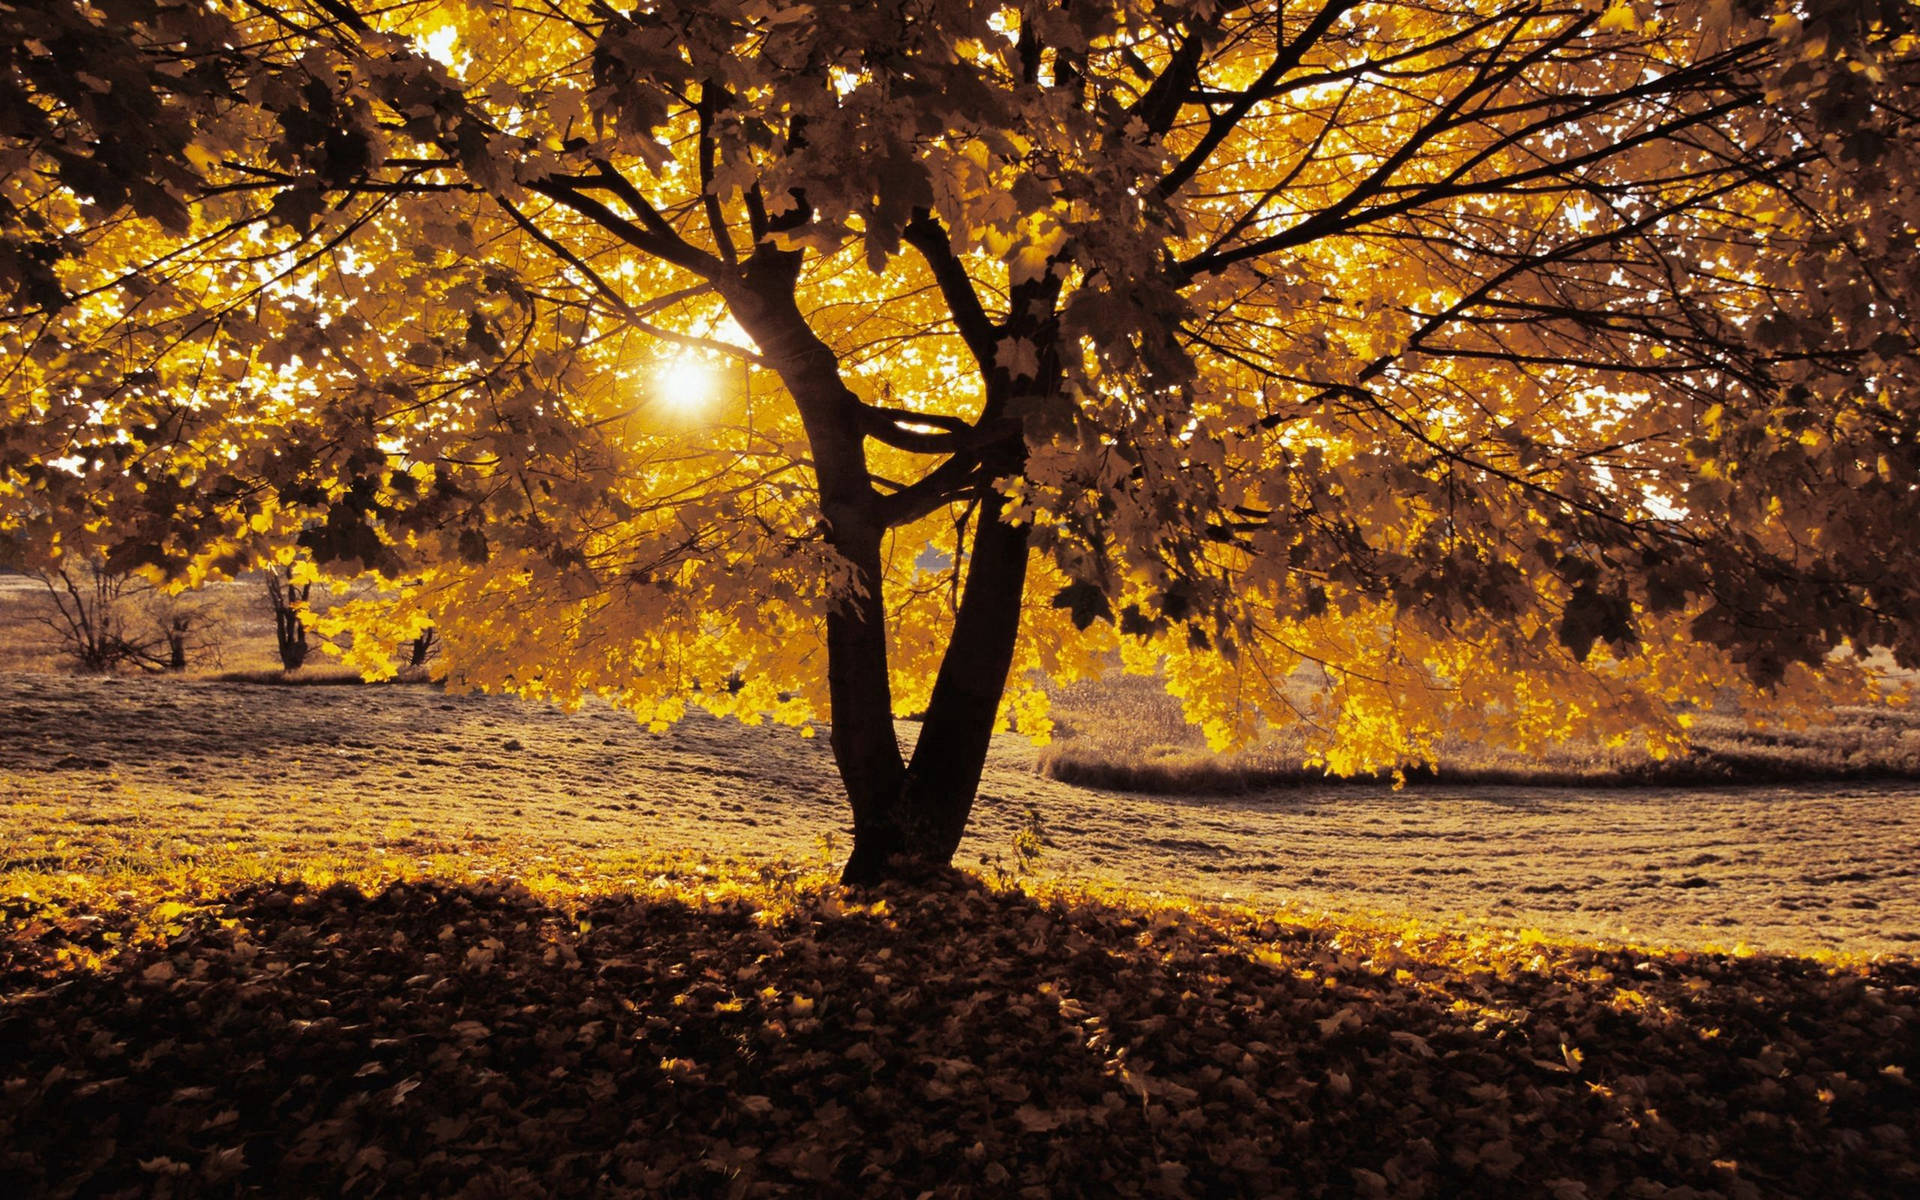 Autumn tree with yellow leaves on a bright sunny day during autumn season.